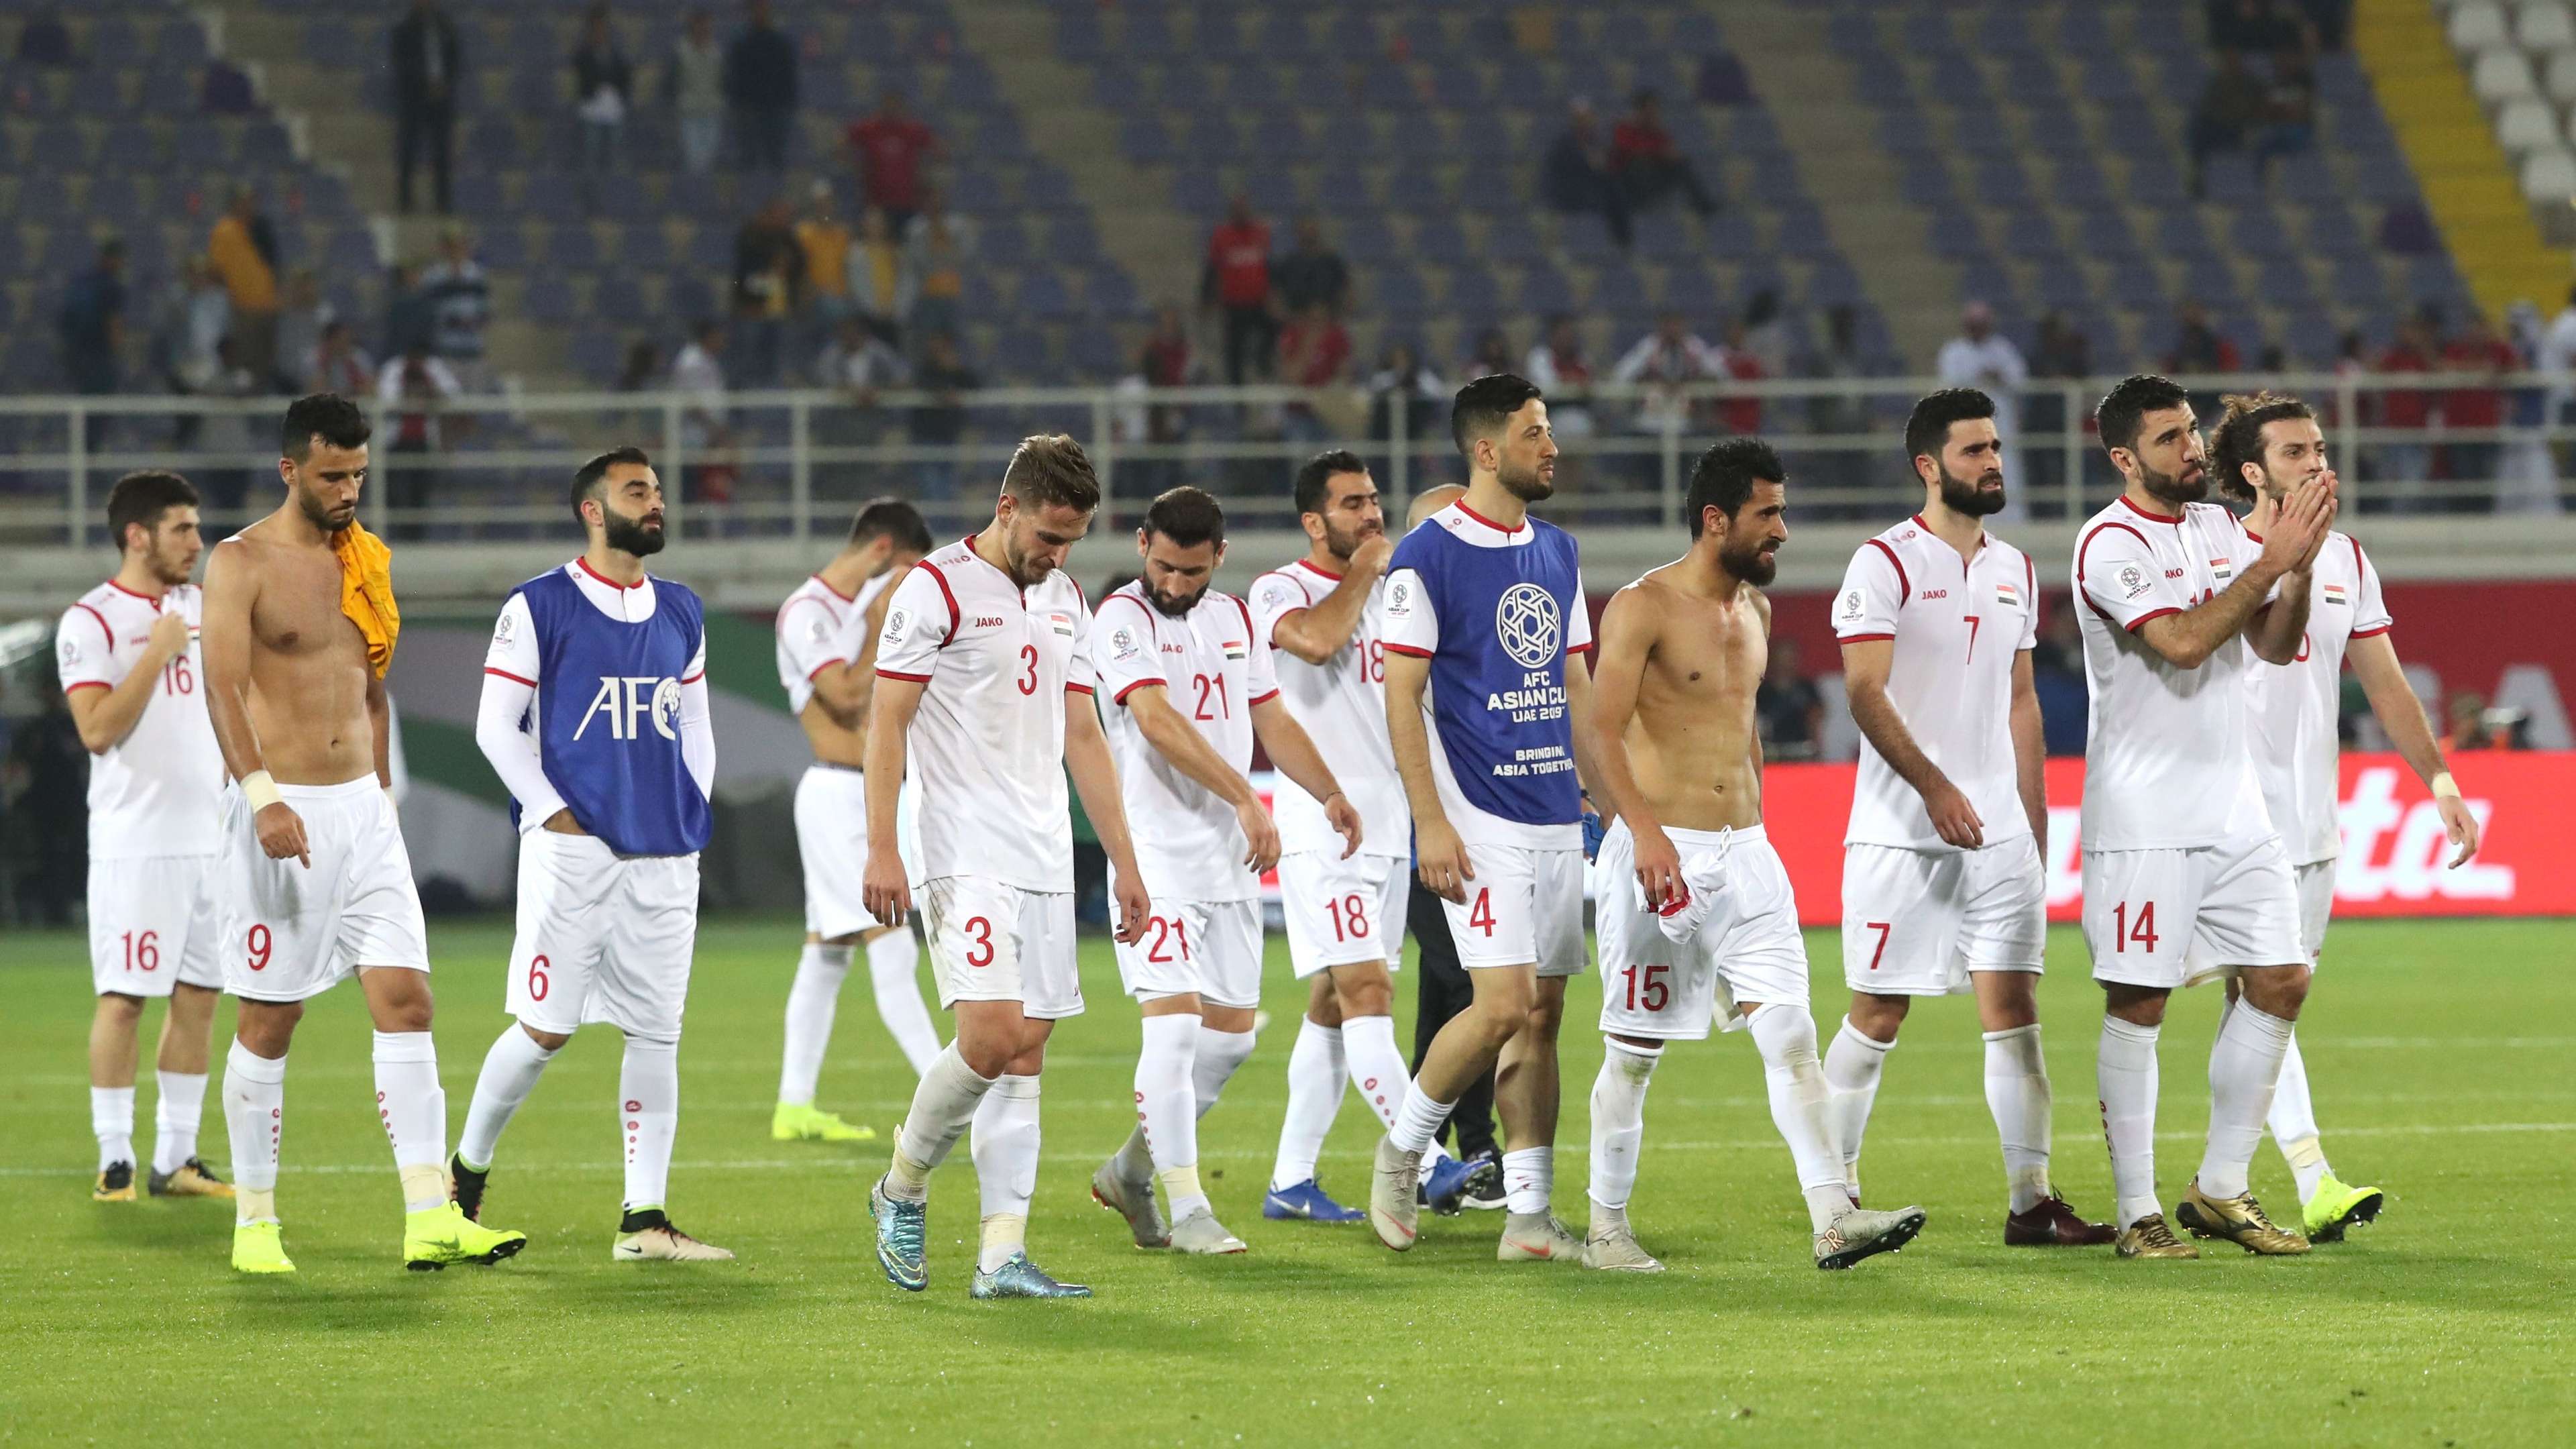 Syria AFC Asian Cup 2019